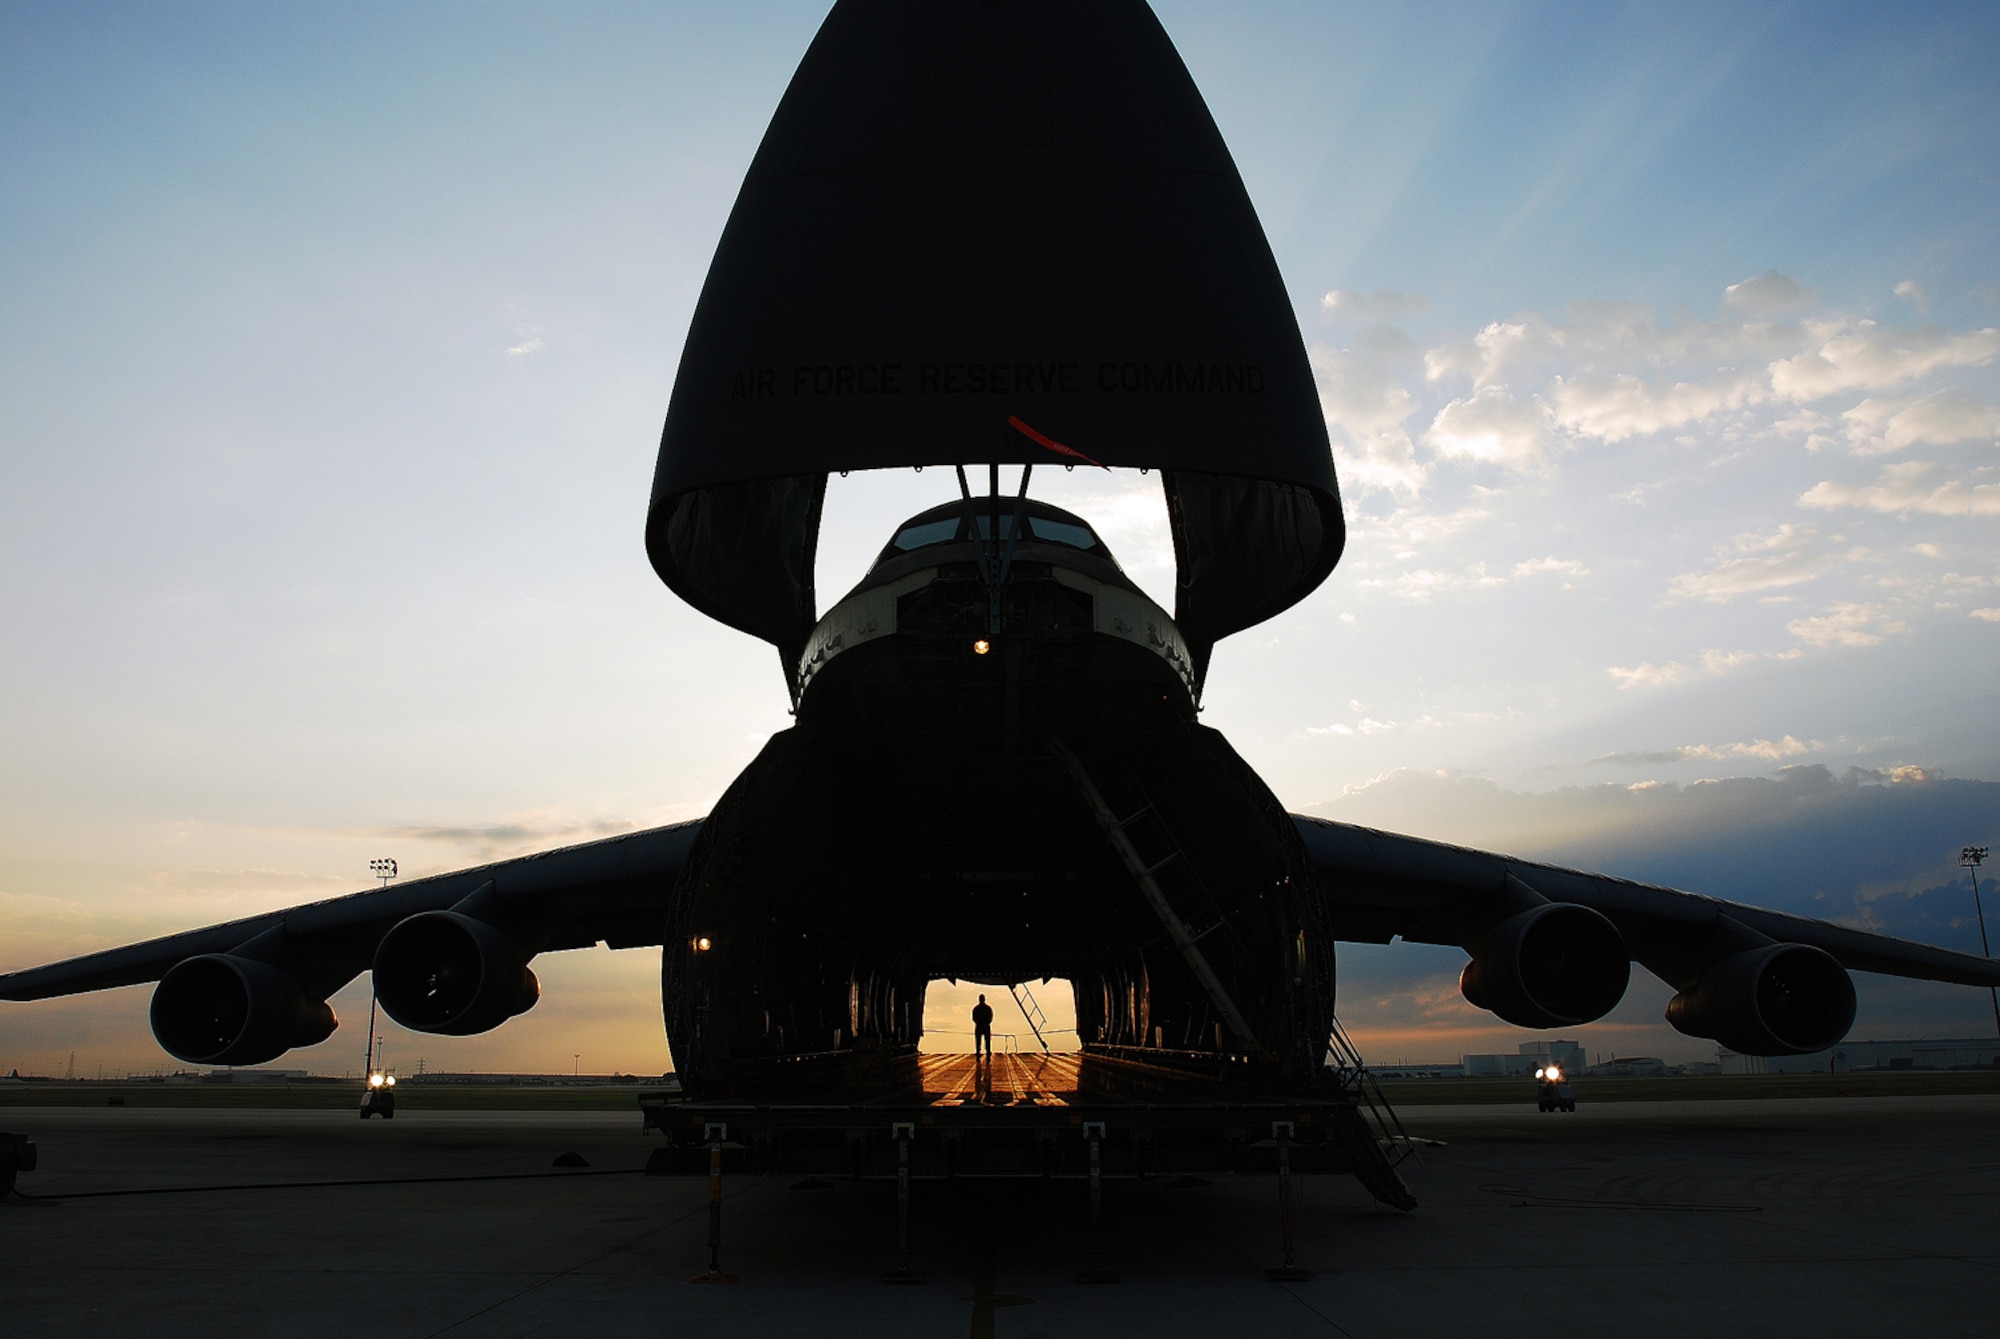 A C-5A Galaxy cargo aircraft assigned to Air Force Reserve Command's 433rd Airlift Wing "yawns" before sunrise May 22, 2009, on the flightline at Lackland Air Force Base, Texas. The fiscal 2010 National Defense Authorization Act directs the Air Force to halt plans to retire its C-5A's, to run more tests on the aircraft and to present a report to Congress giving reasons for keeping the older C-5s or mothballing them in favor of a newer transport aircraft. (U.S. Air Force photo/Airman Brian McGloin)
